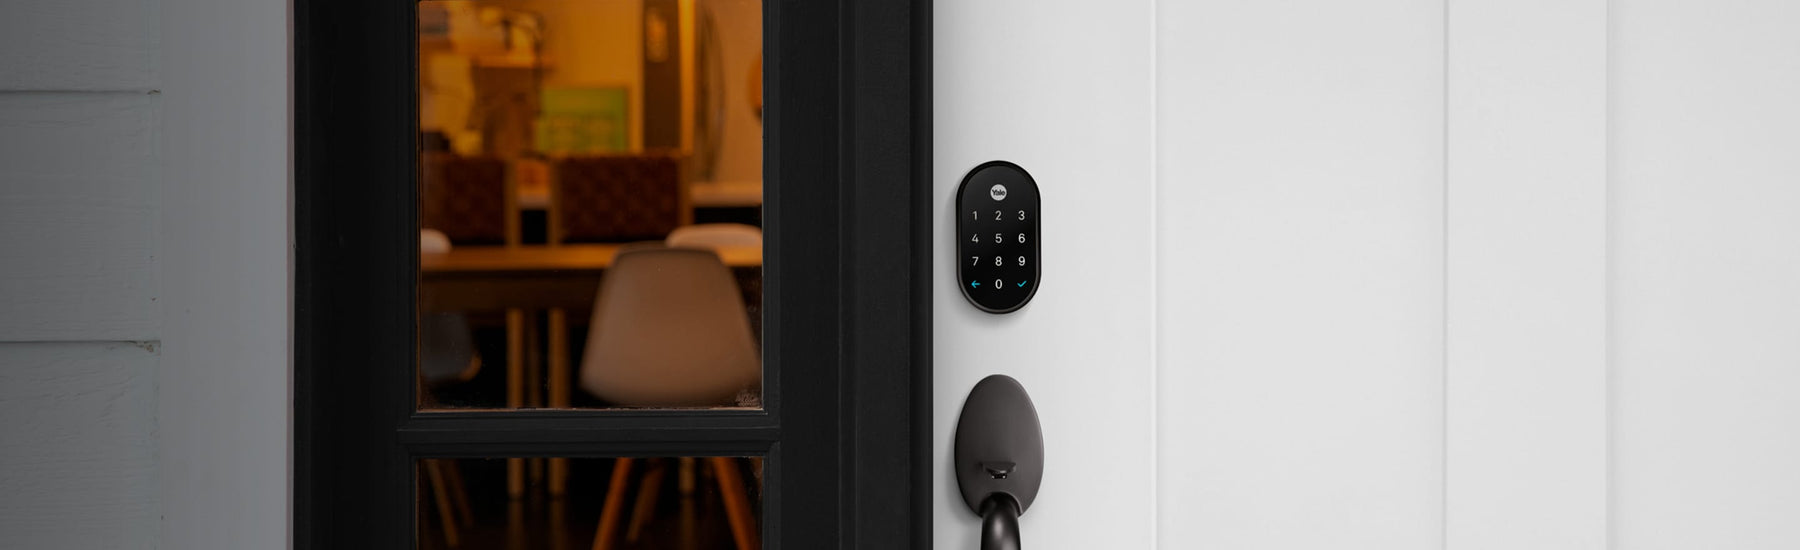 Yale Black Suede Electronic Deadbolt Lighted Keypad Touchscreen Smart Lock  at